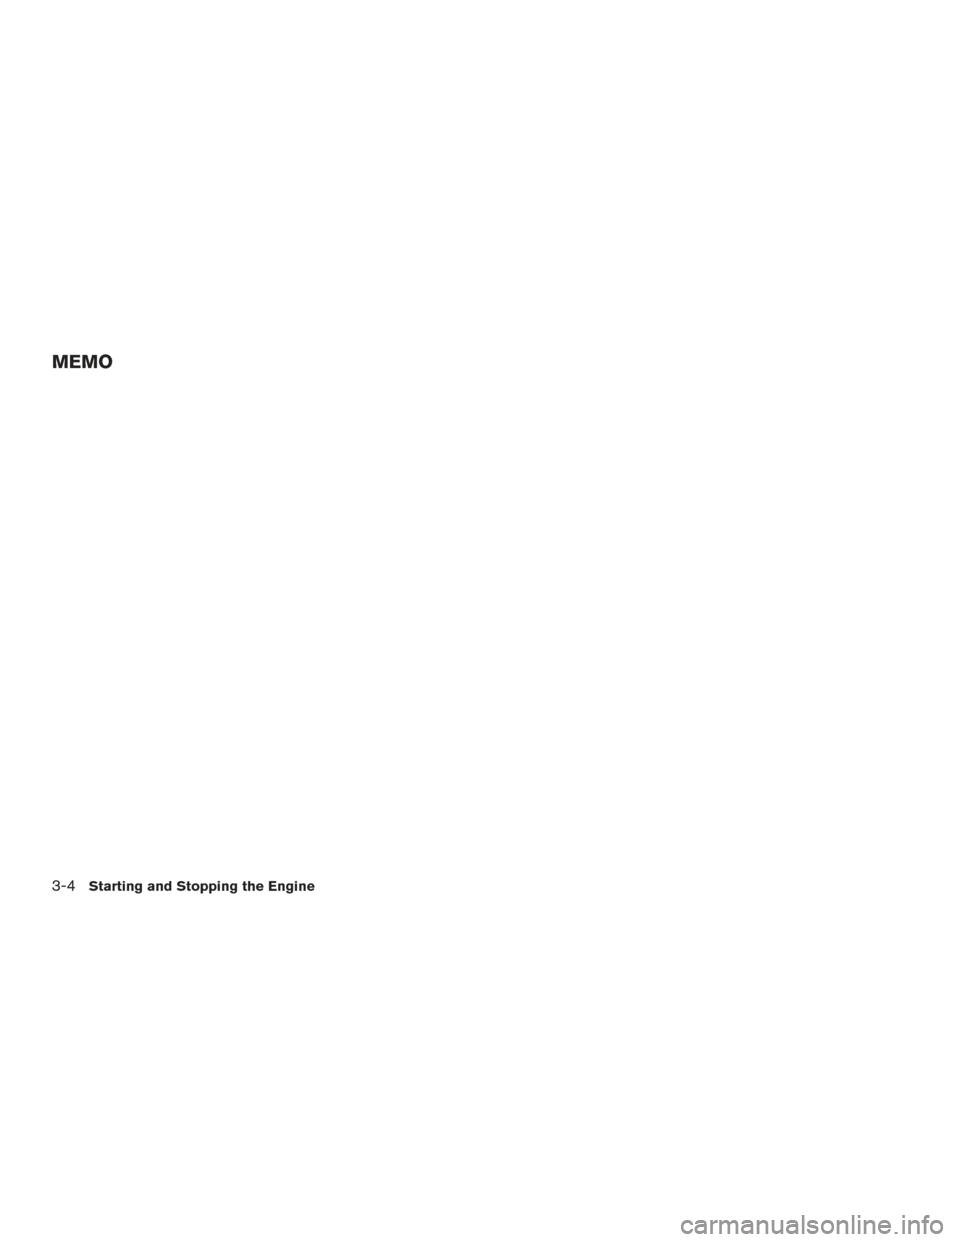 NISSAN TITAN 2016 2.G Owners Manual MEMO
3-4Starting and Stopping the Engine 